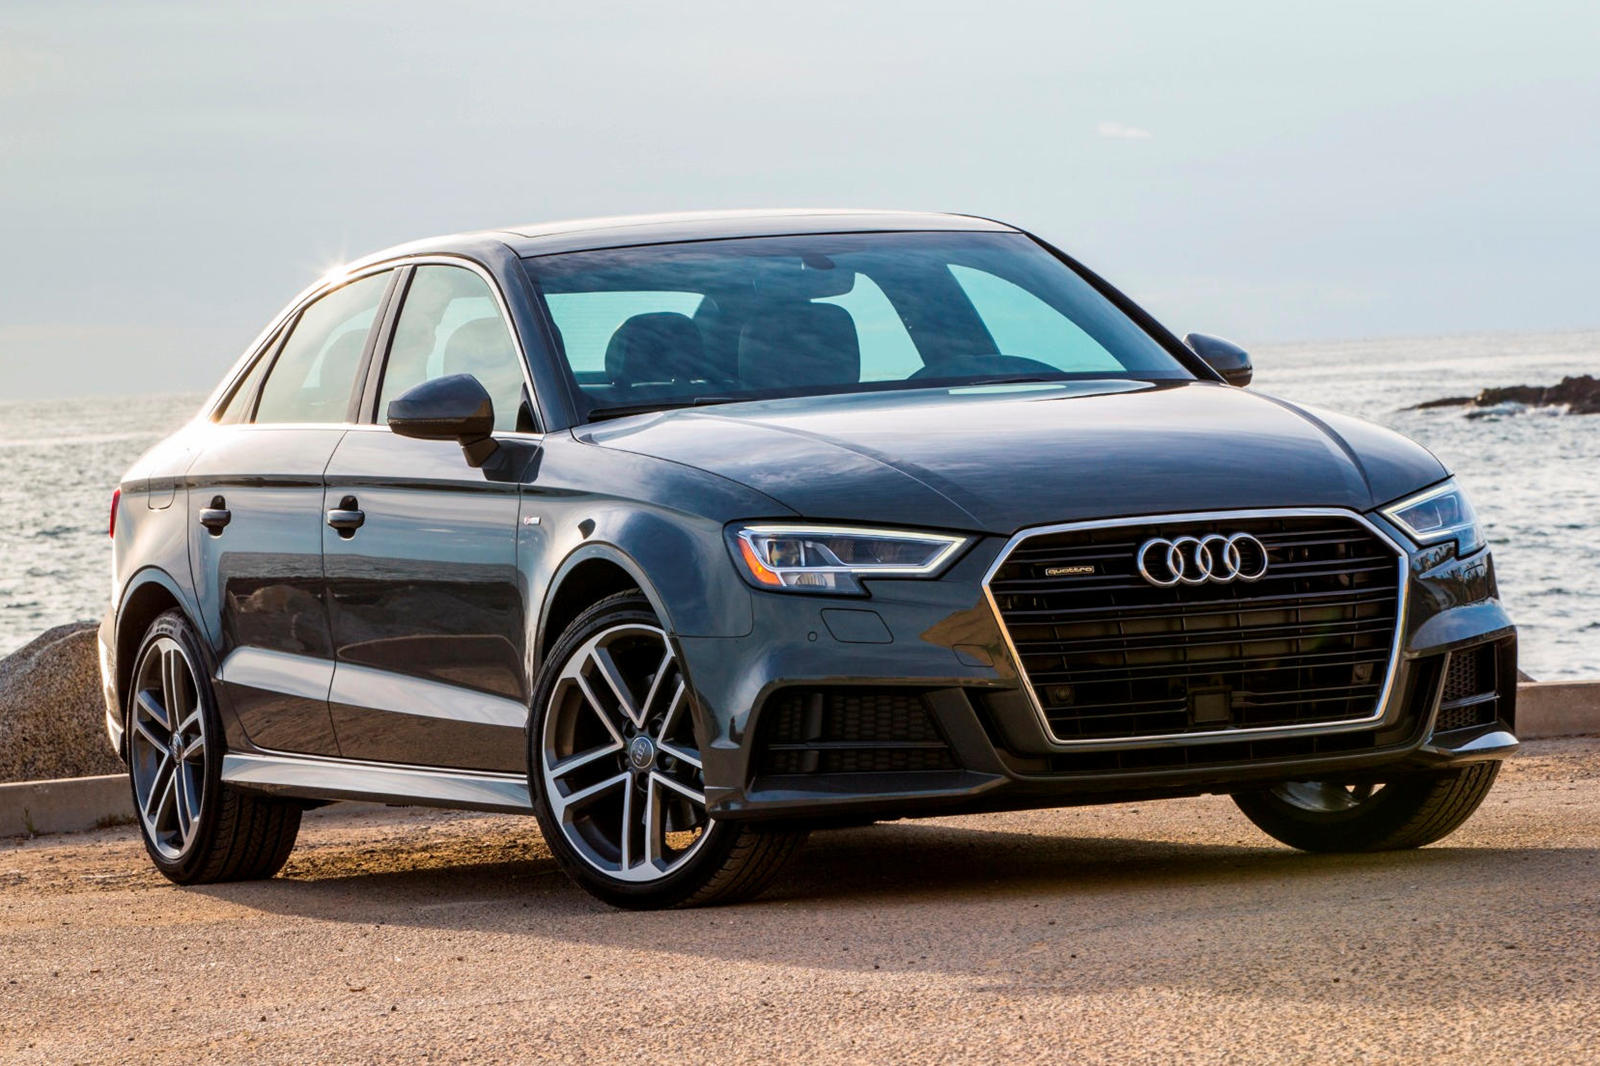 Audi’s new leasing program called reLease